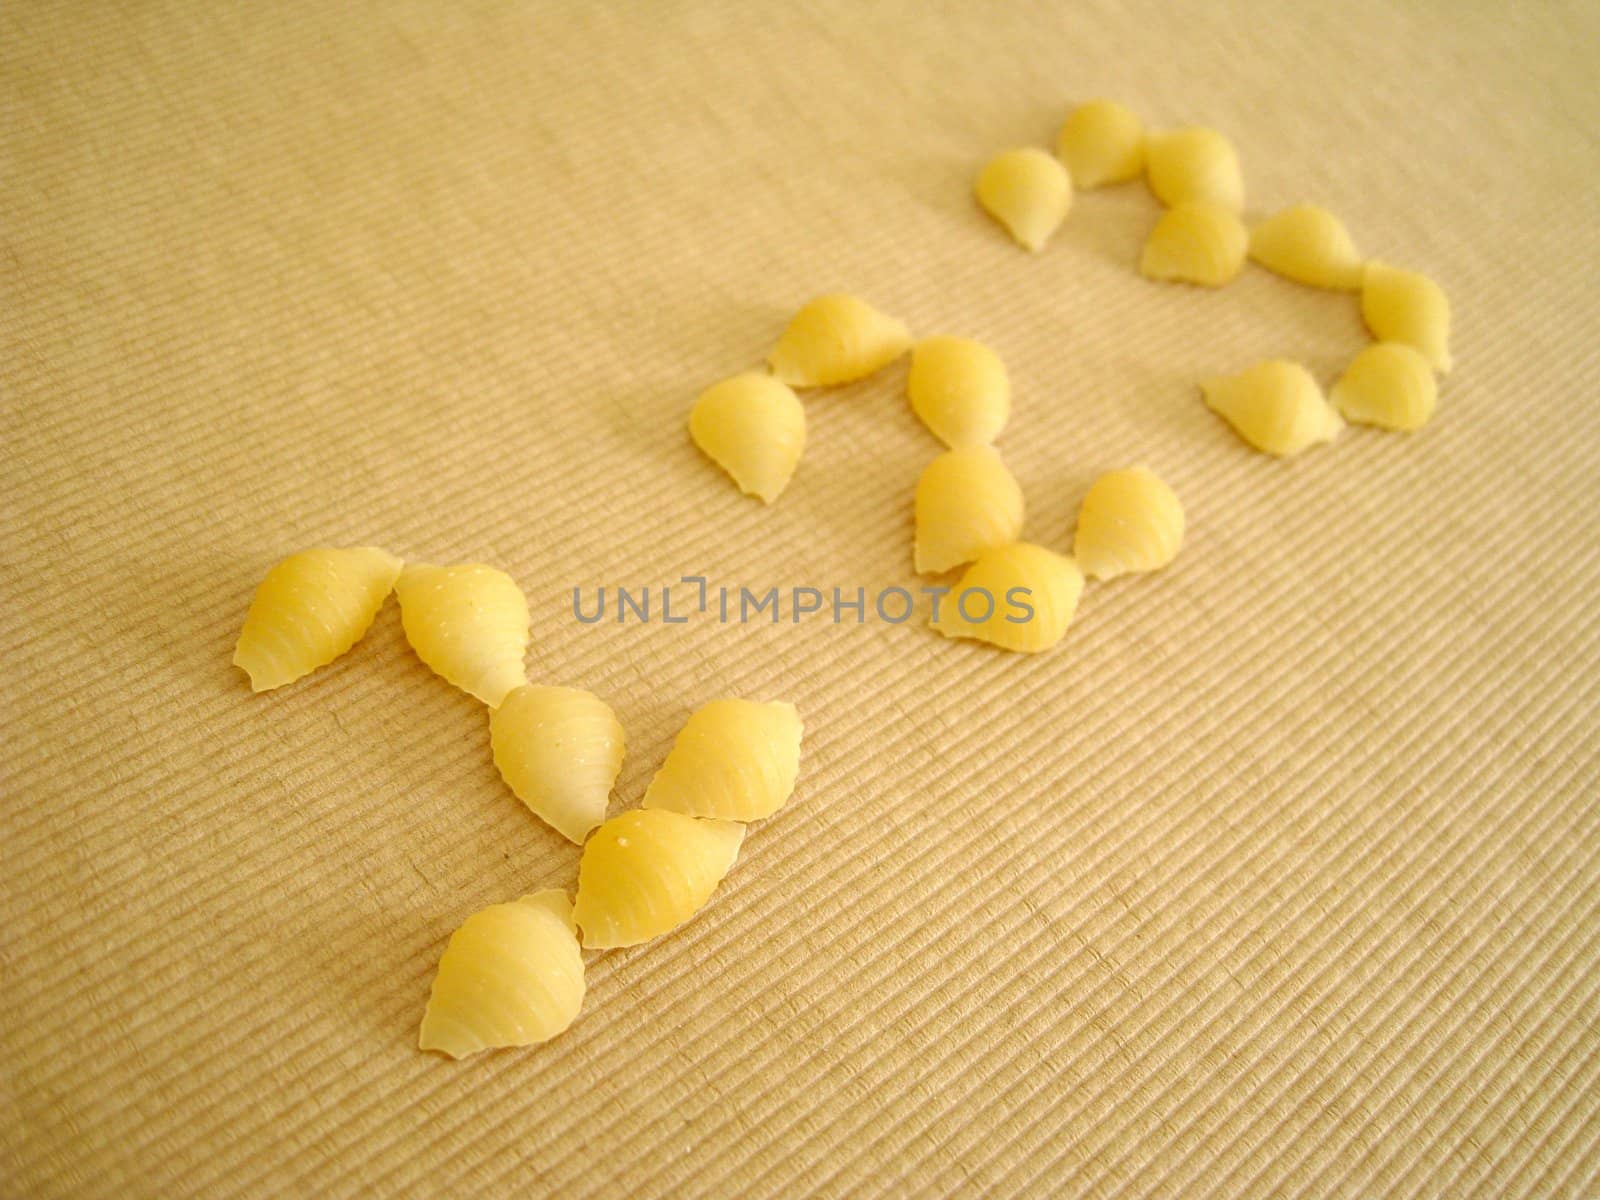 1,2,3 symbols made by pasta shell for numbering